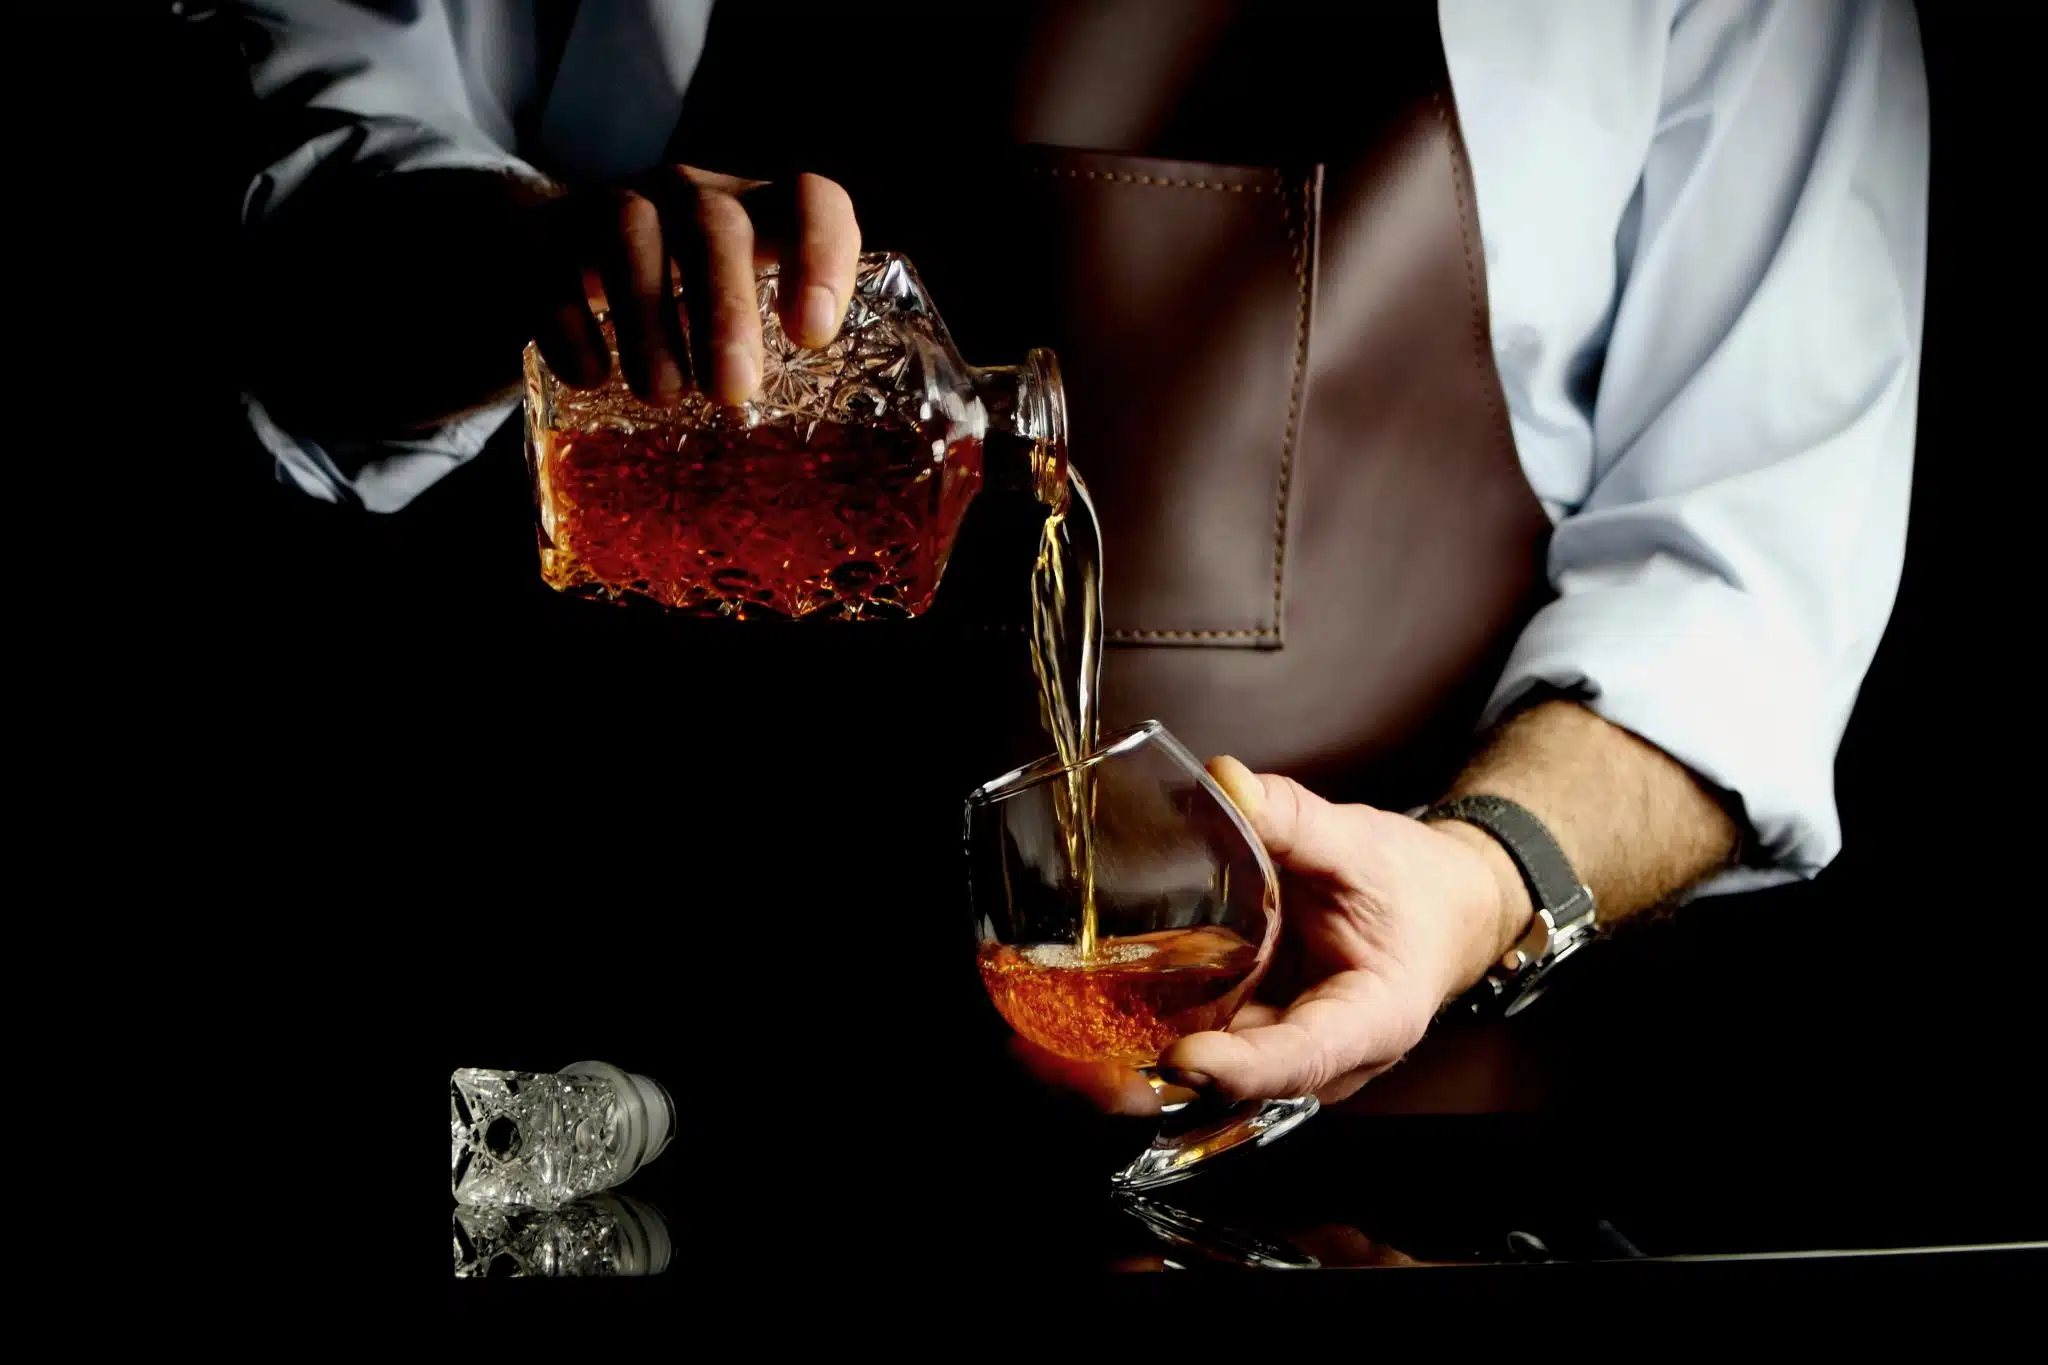 A person in a dress shirt pours amber-colored brandy from a crystal decanter into a glass against a dark background.